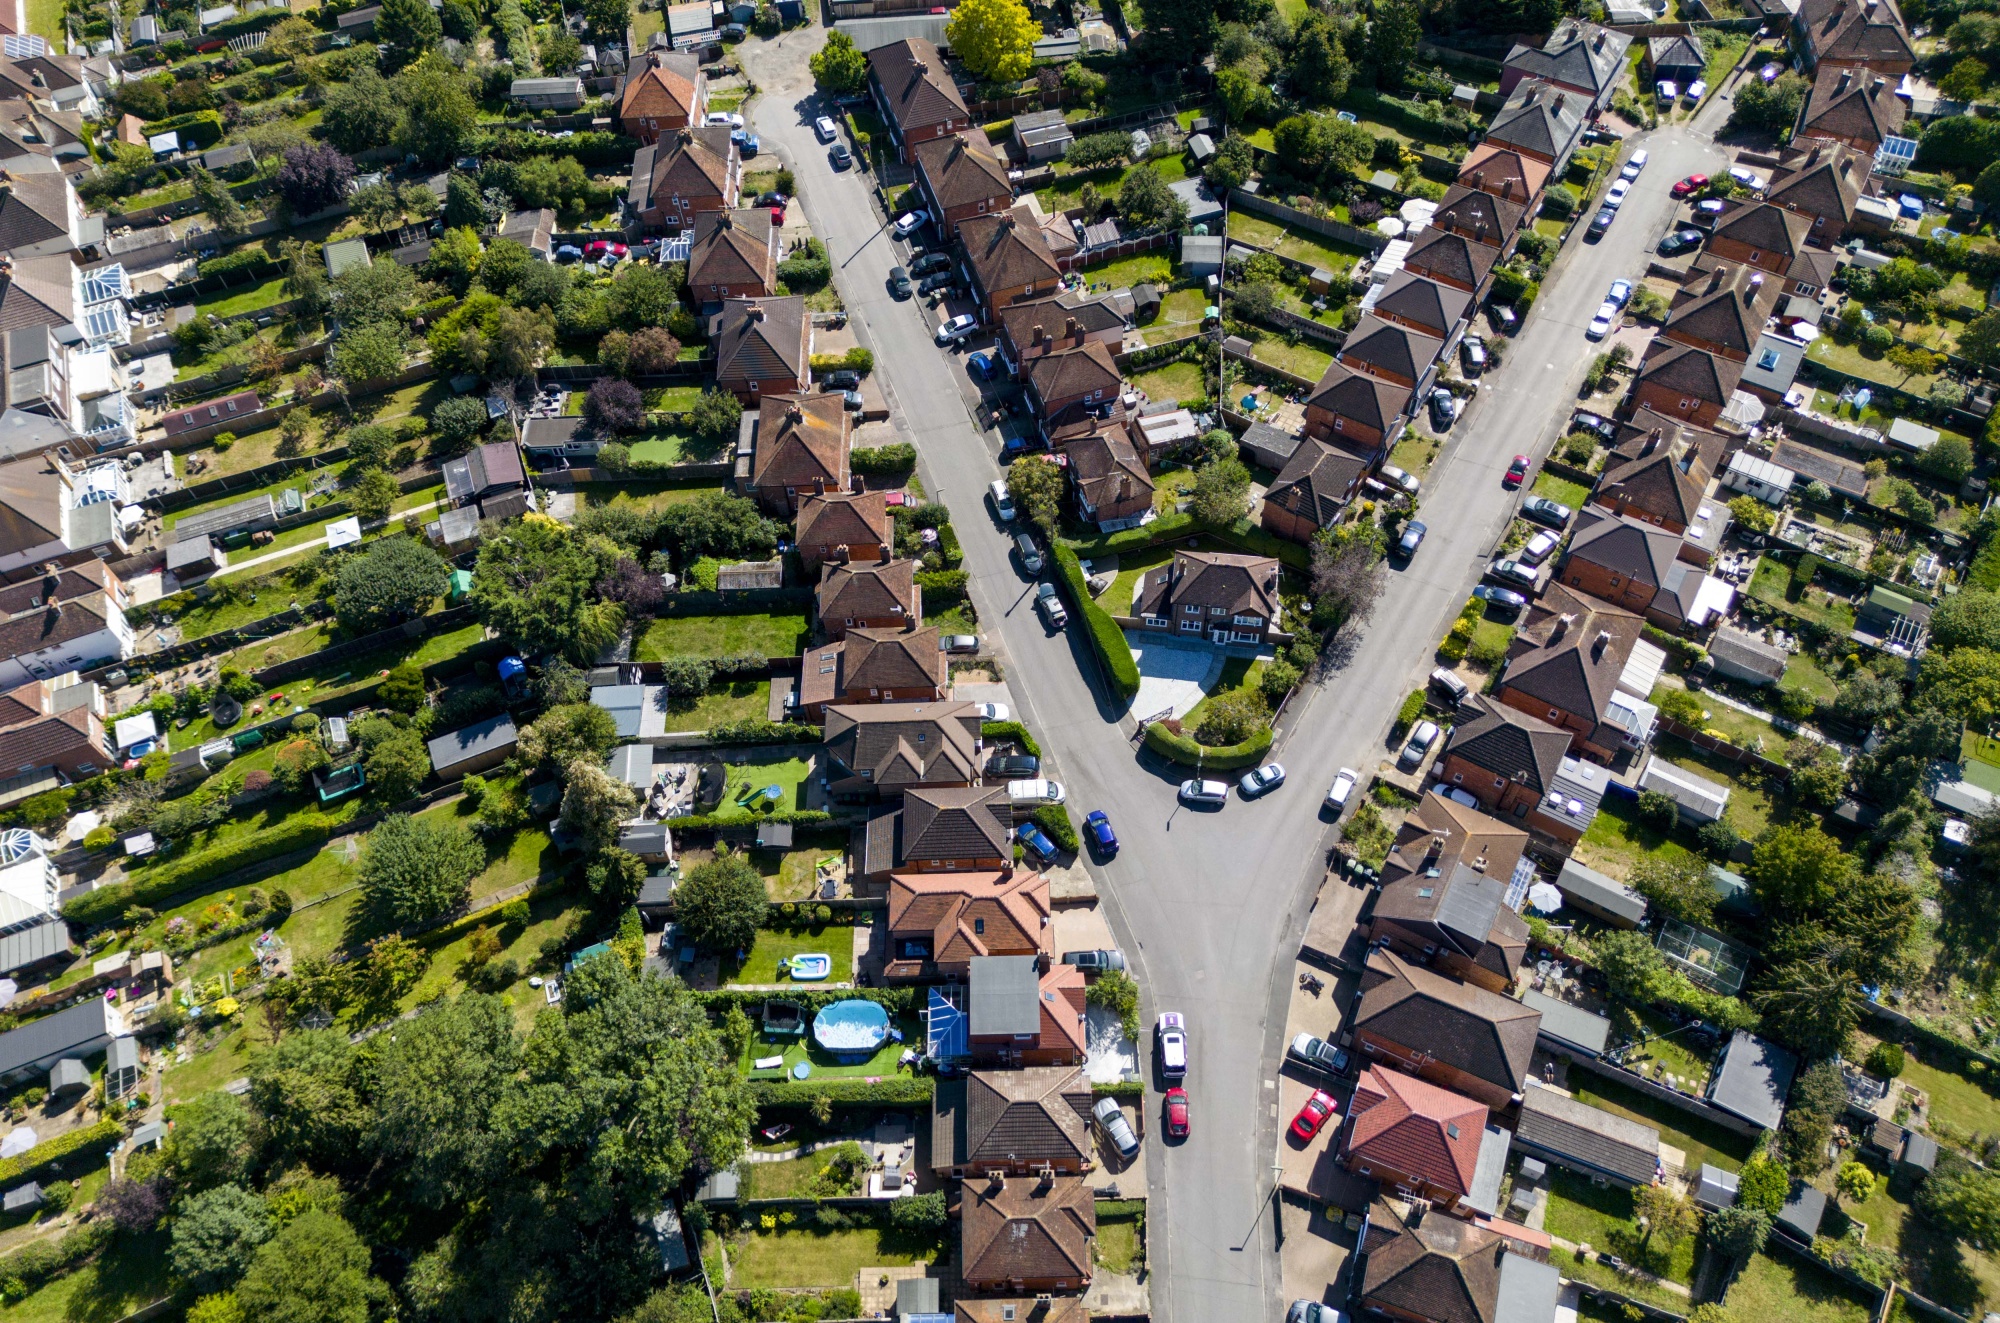 UK House Prices Fall the Most in 14 Years